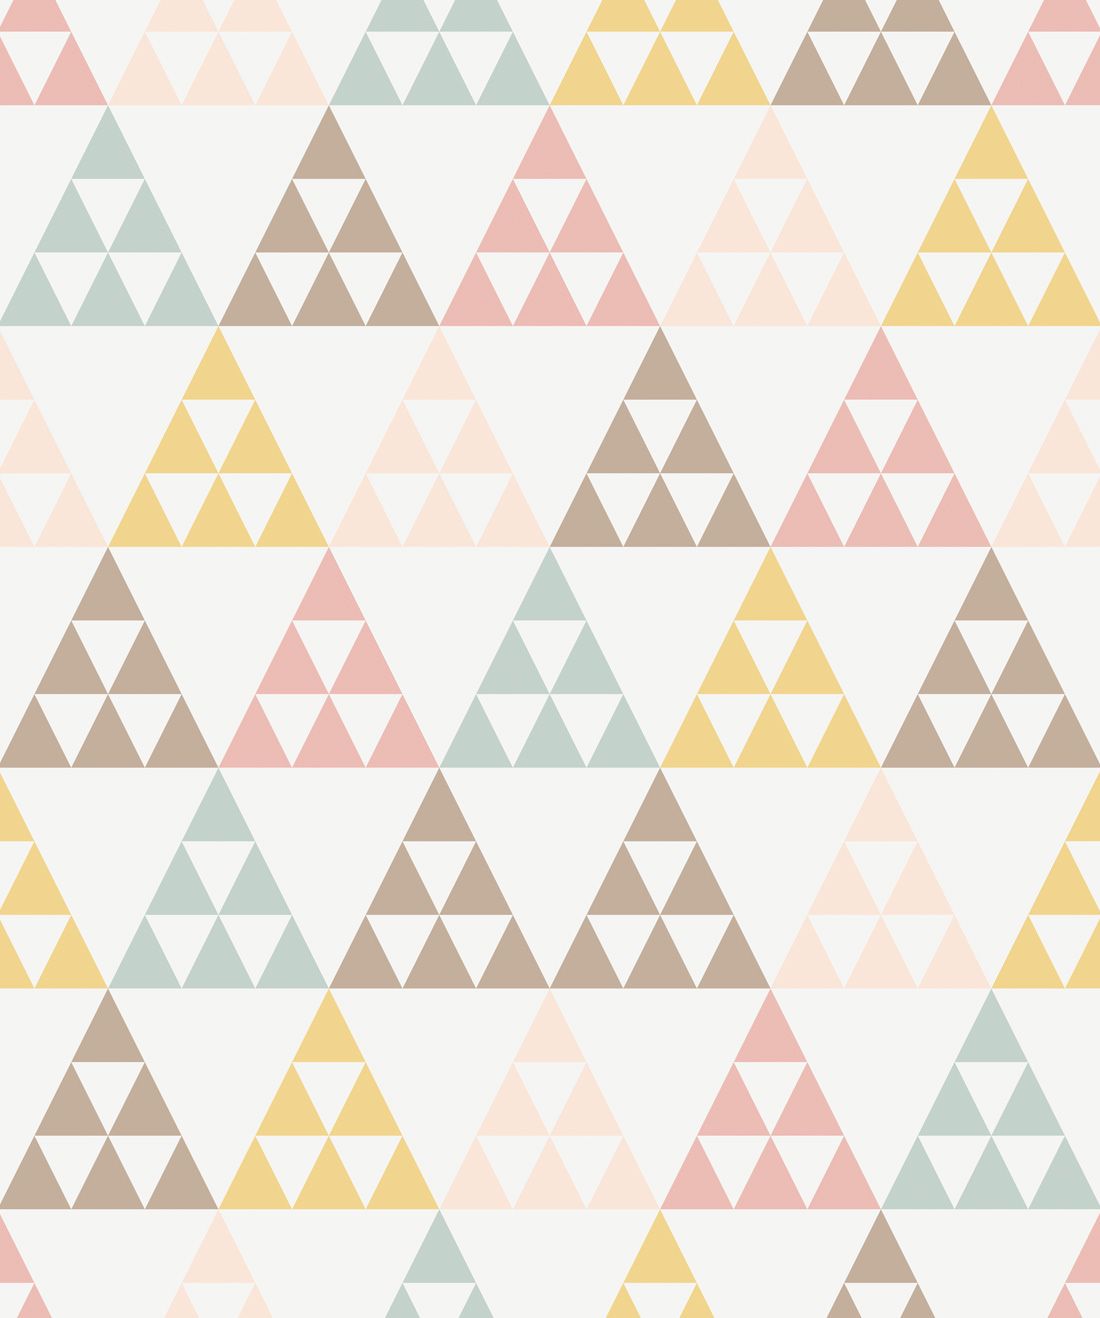 Pastelangles is a dreamy geometric wallpaper